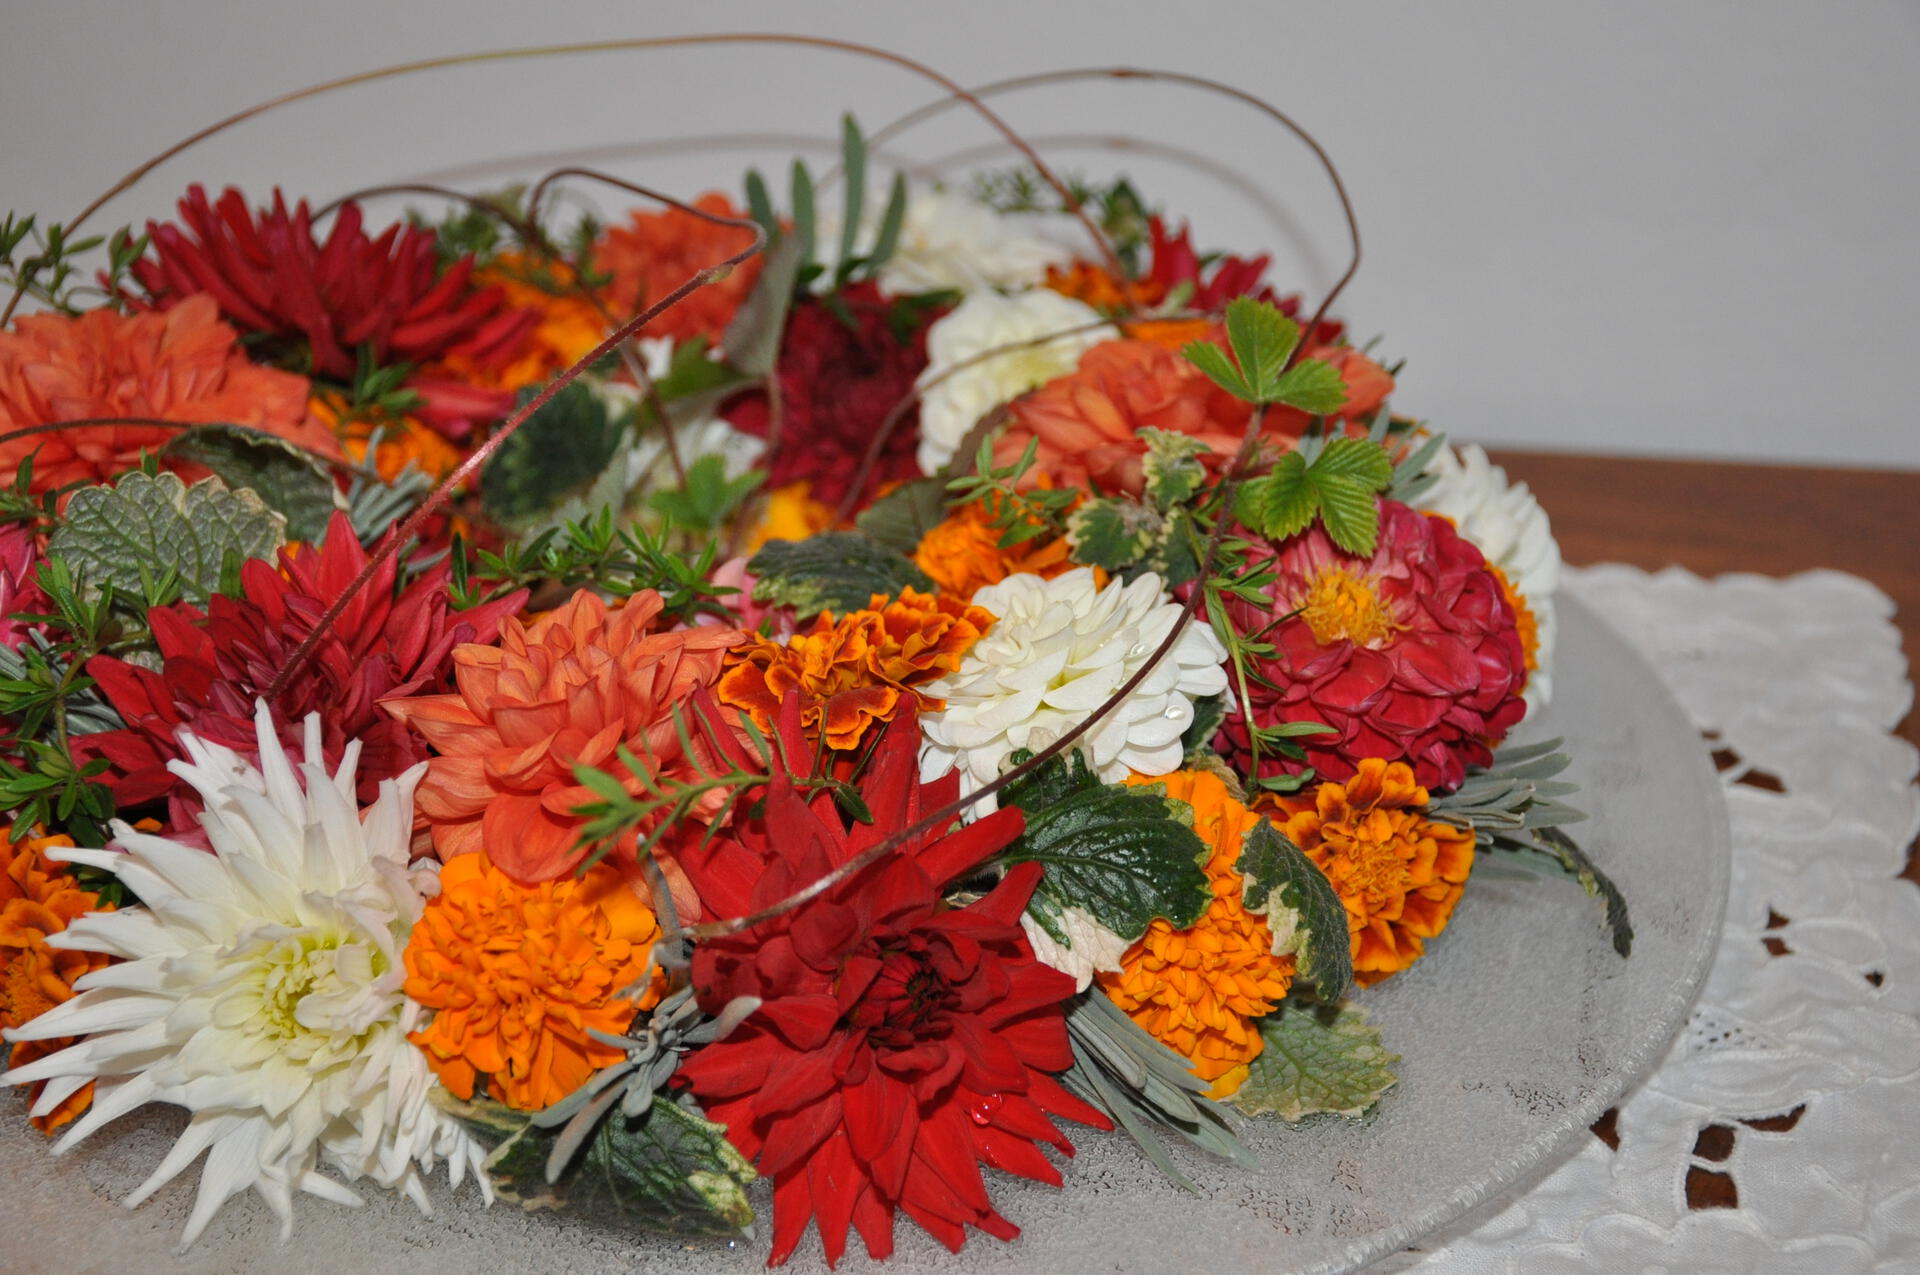 Flowers on a decorative plate